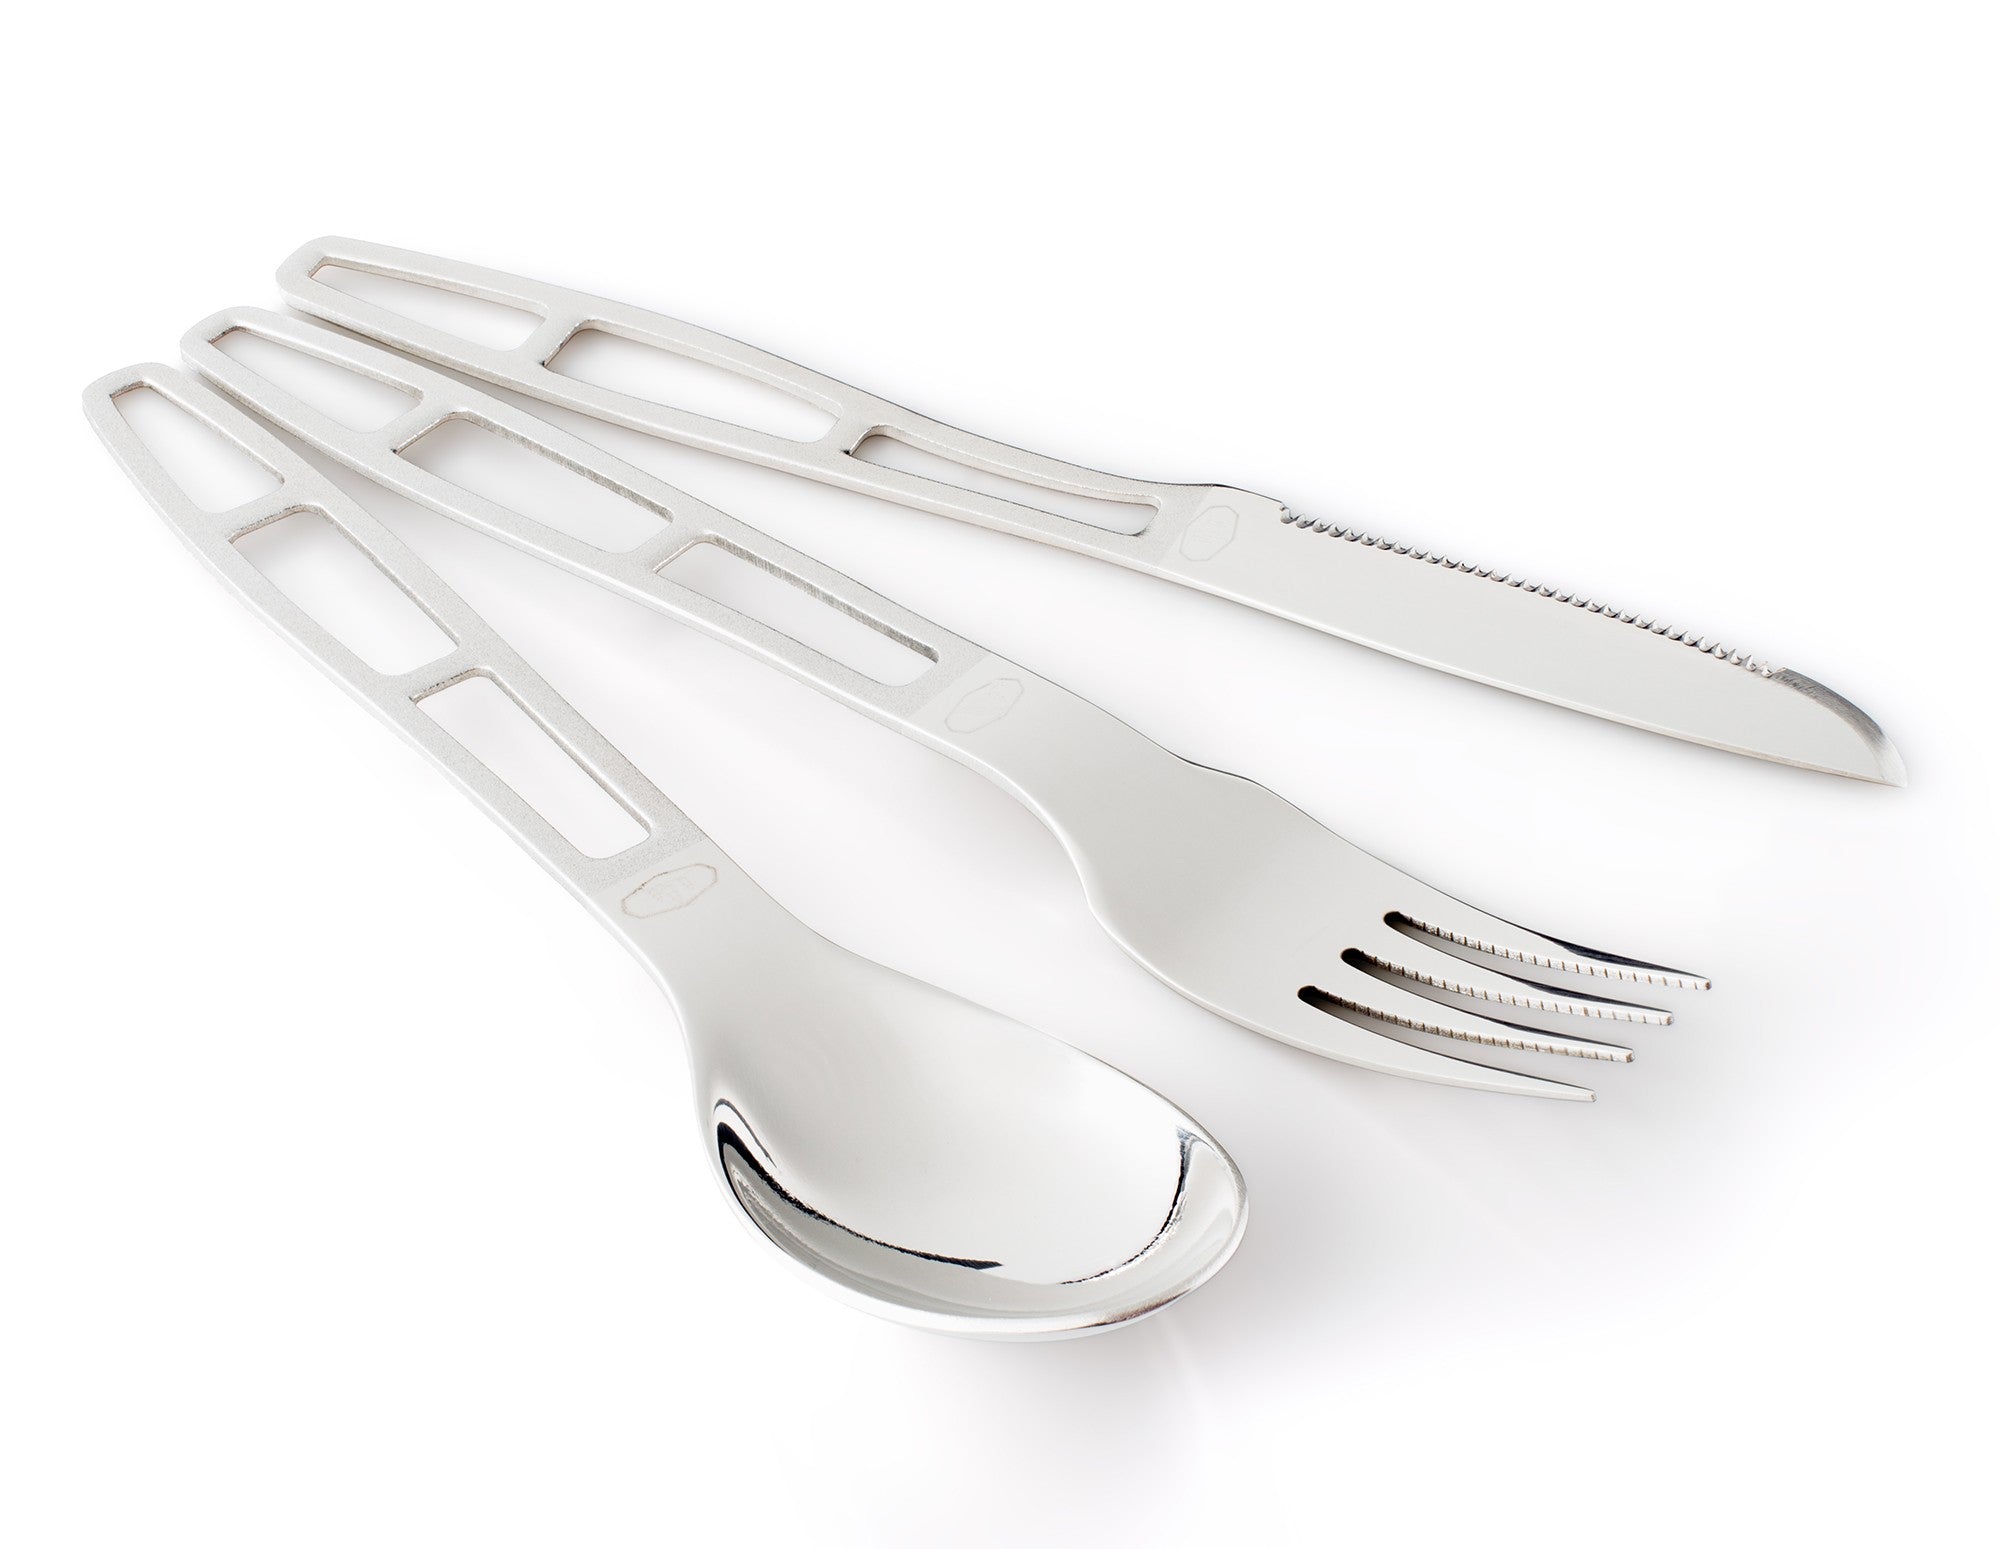 Glacier Stainless 3 pc. Cutlery Set